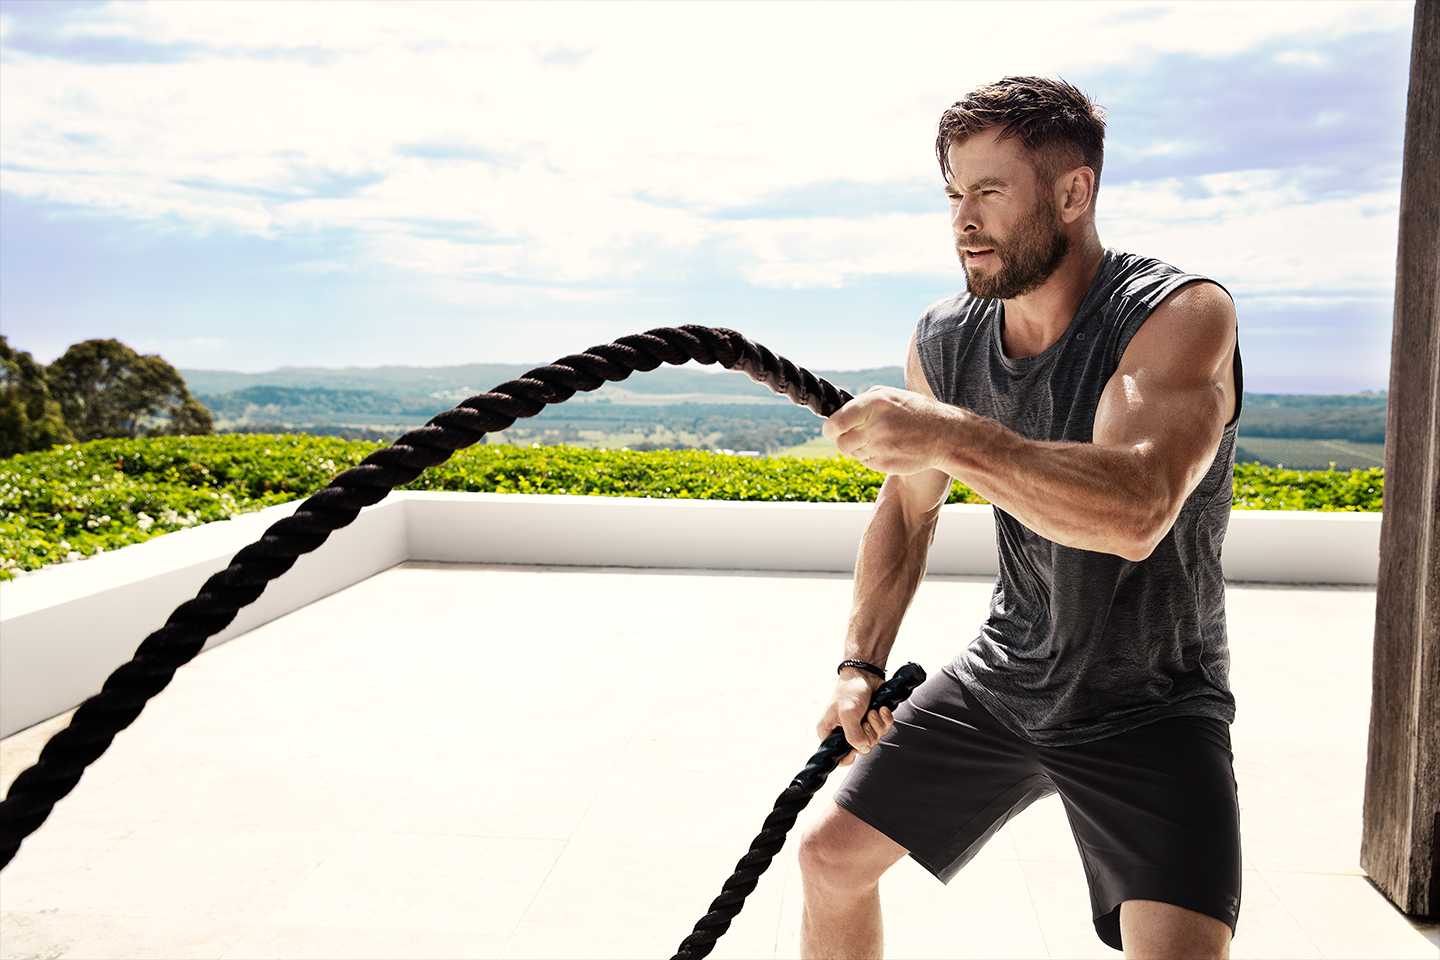 Chris Hemsworth steps into the fitness game: Launches 'Centr', a mind-body wellness app